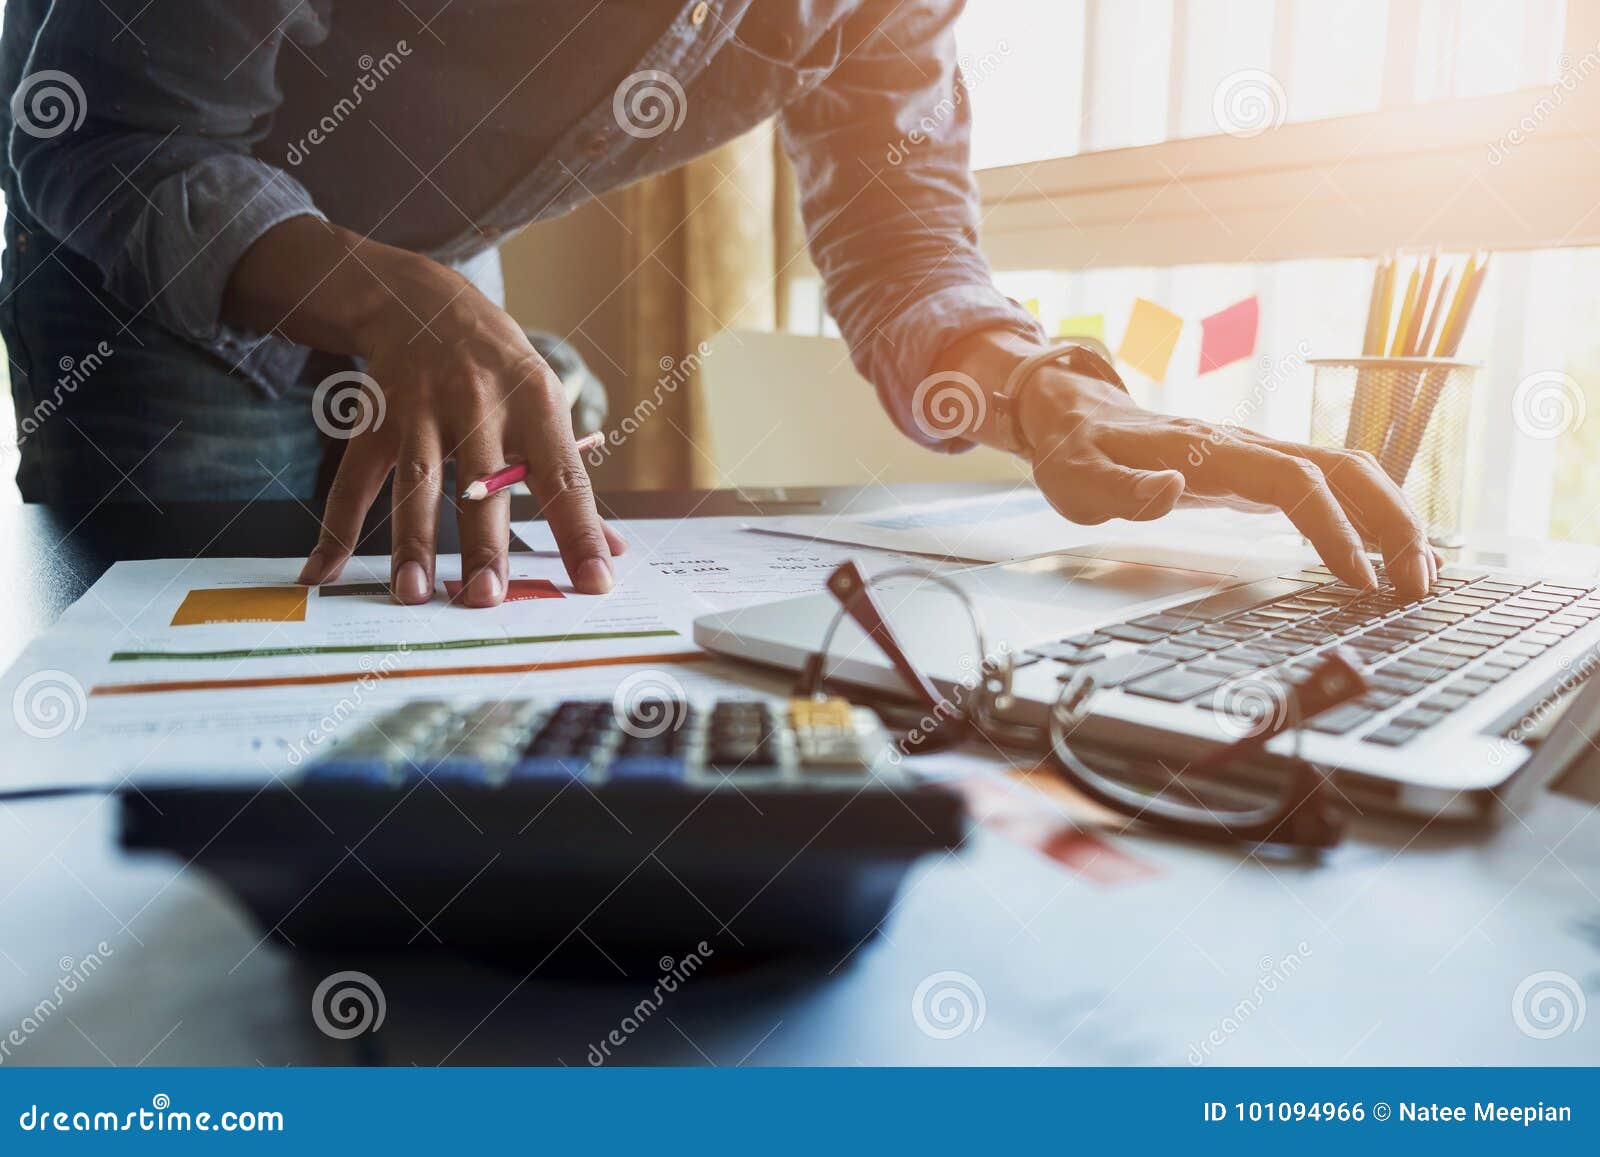 accountants work analyzing financial reports on a laptop at his